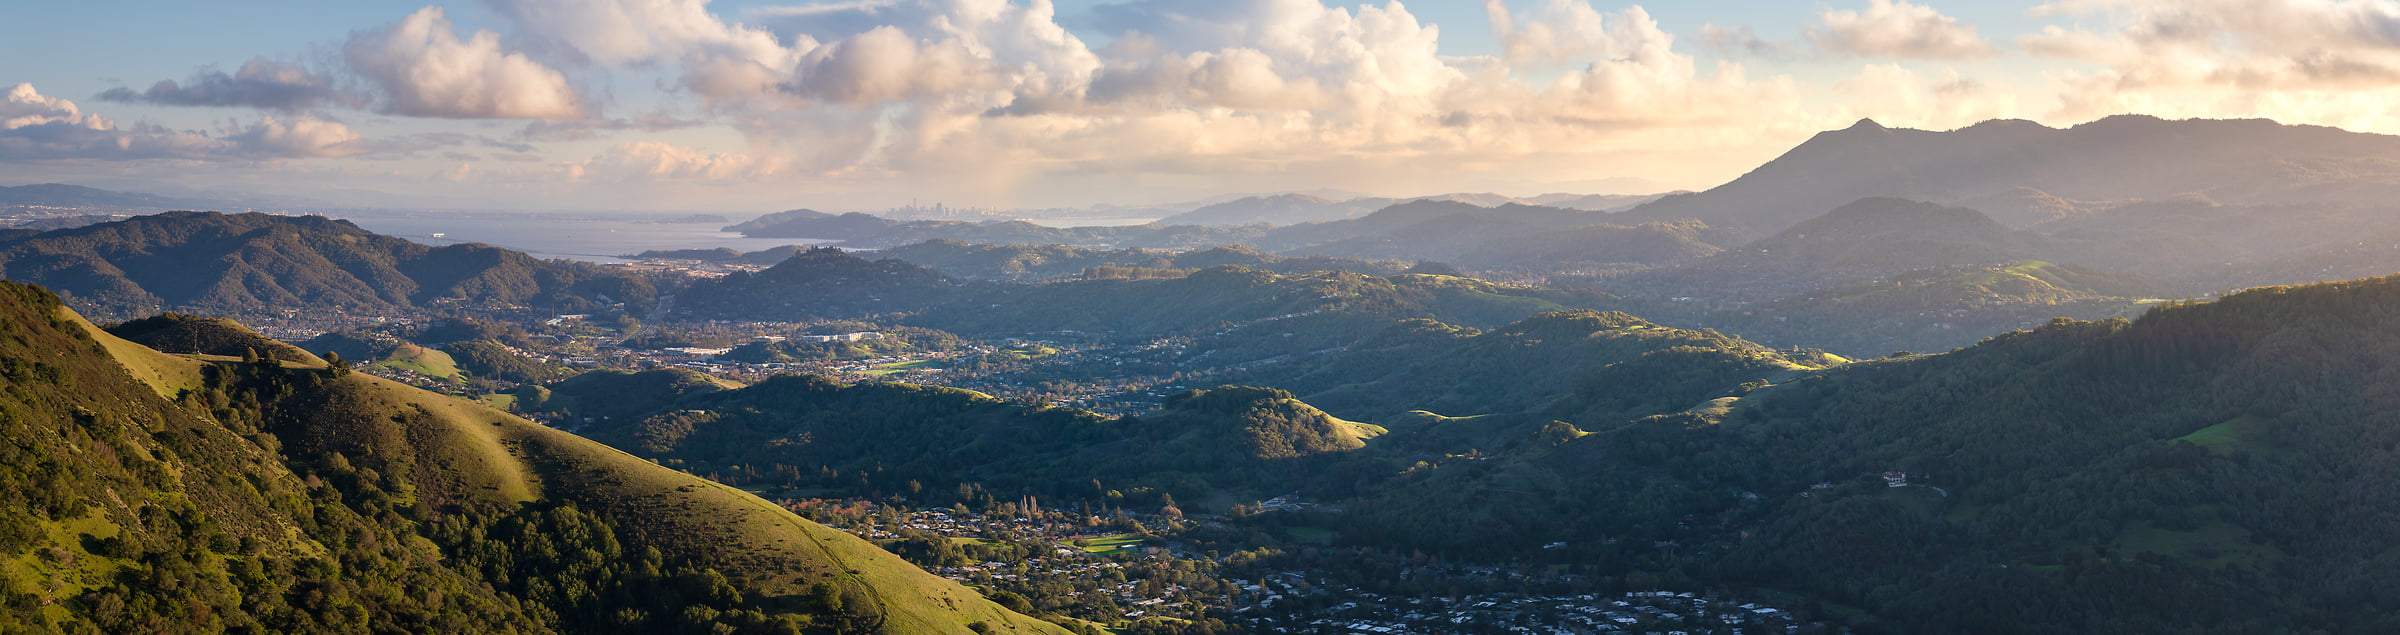 269 megapixels! A very high resolution, large-format VAST photo print of Marin County in the San Francisco bay area; panorama photograph created by Jeff Lewis in Marin County, California